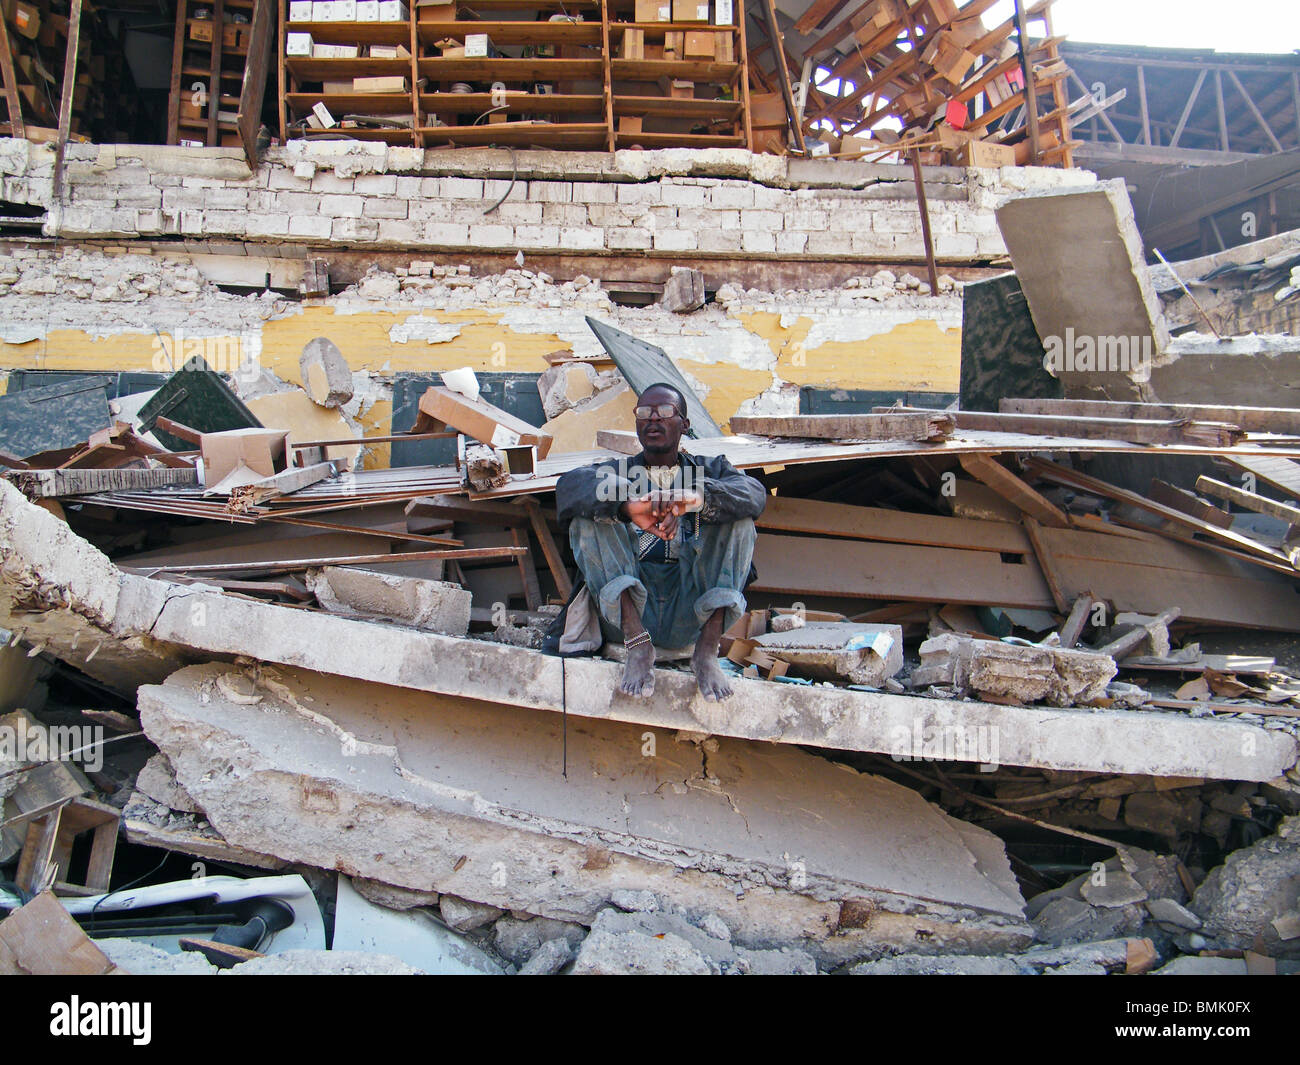 An elderly man sits in the rubble of a collapsed building in Port au Prince after the Haiti earthquake Stock Photo